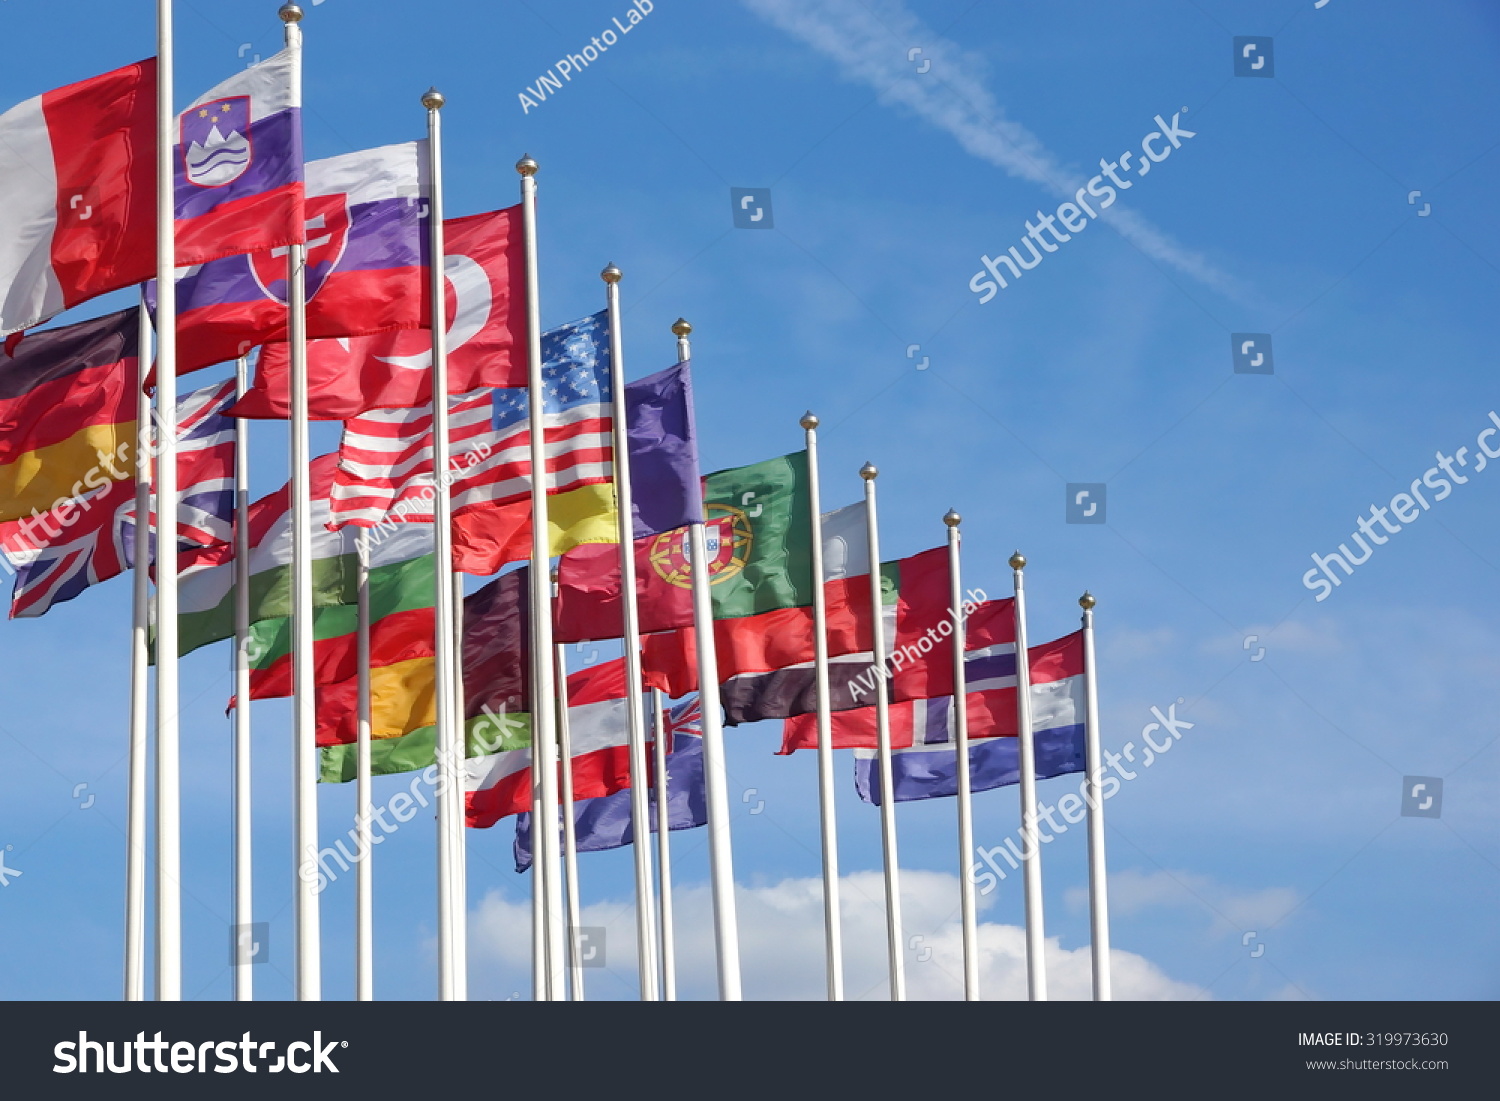 World Flags Blowing In The Wind On The Cloudy Sky Background Stock ...